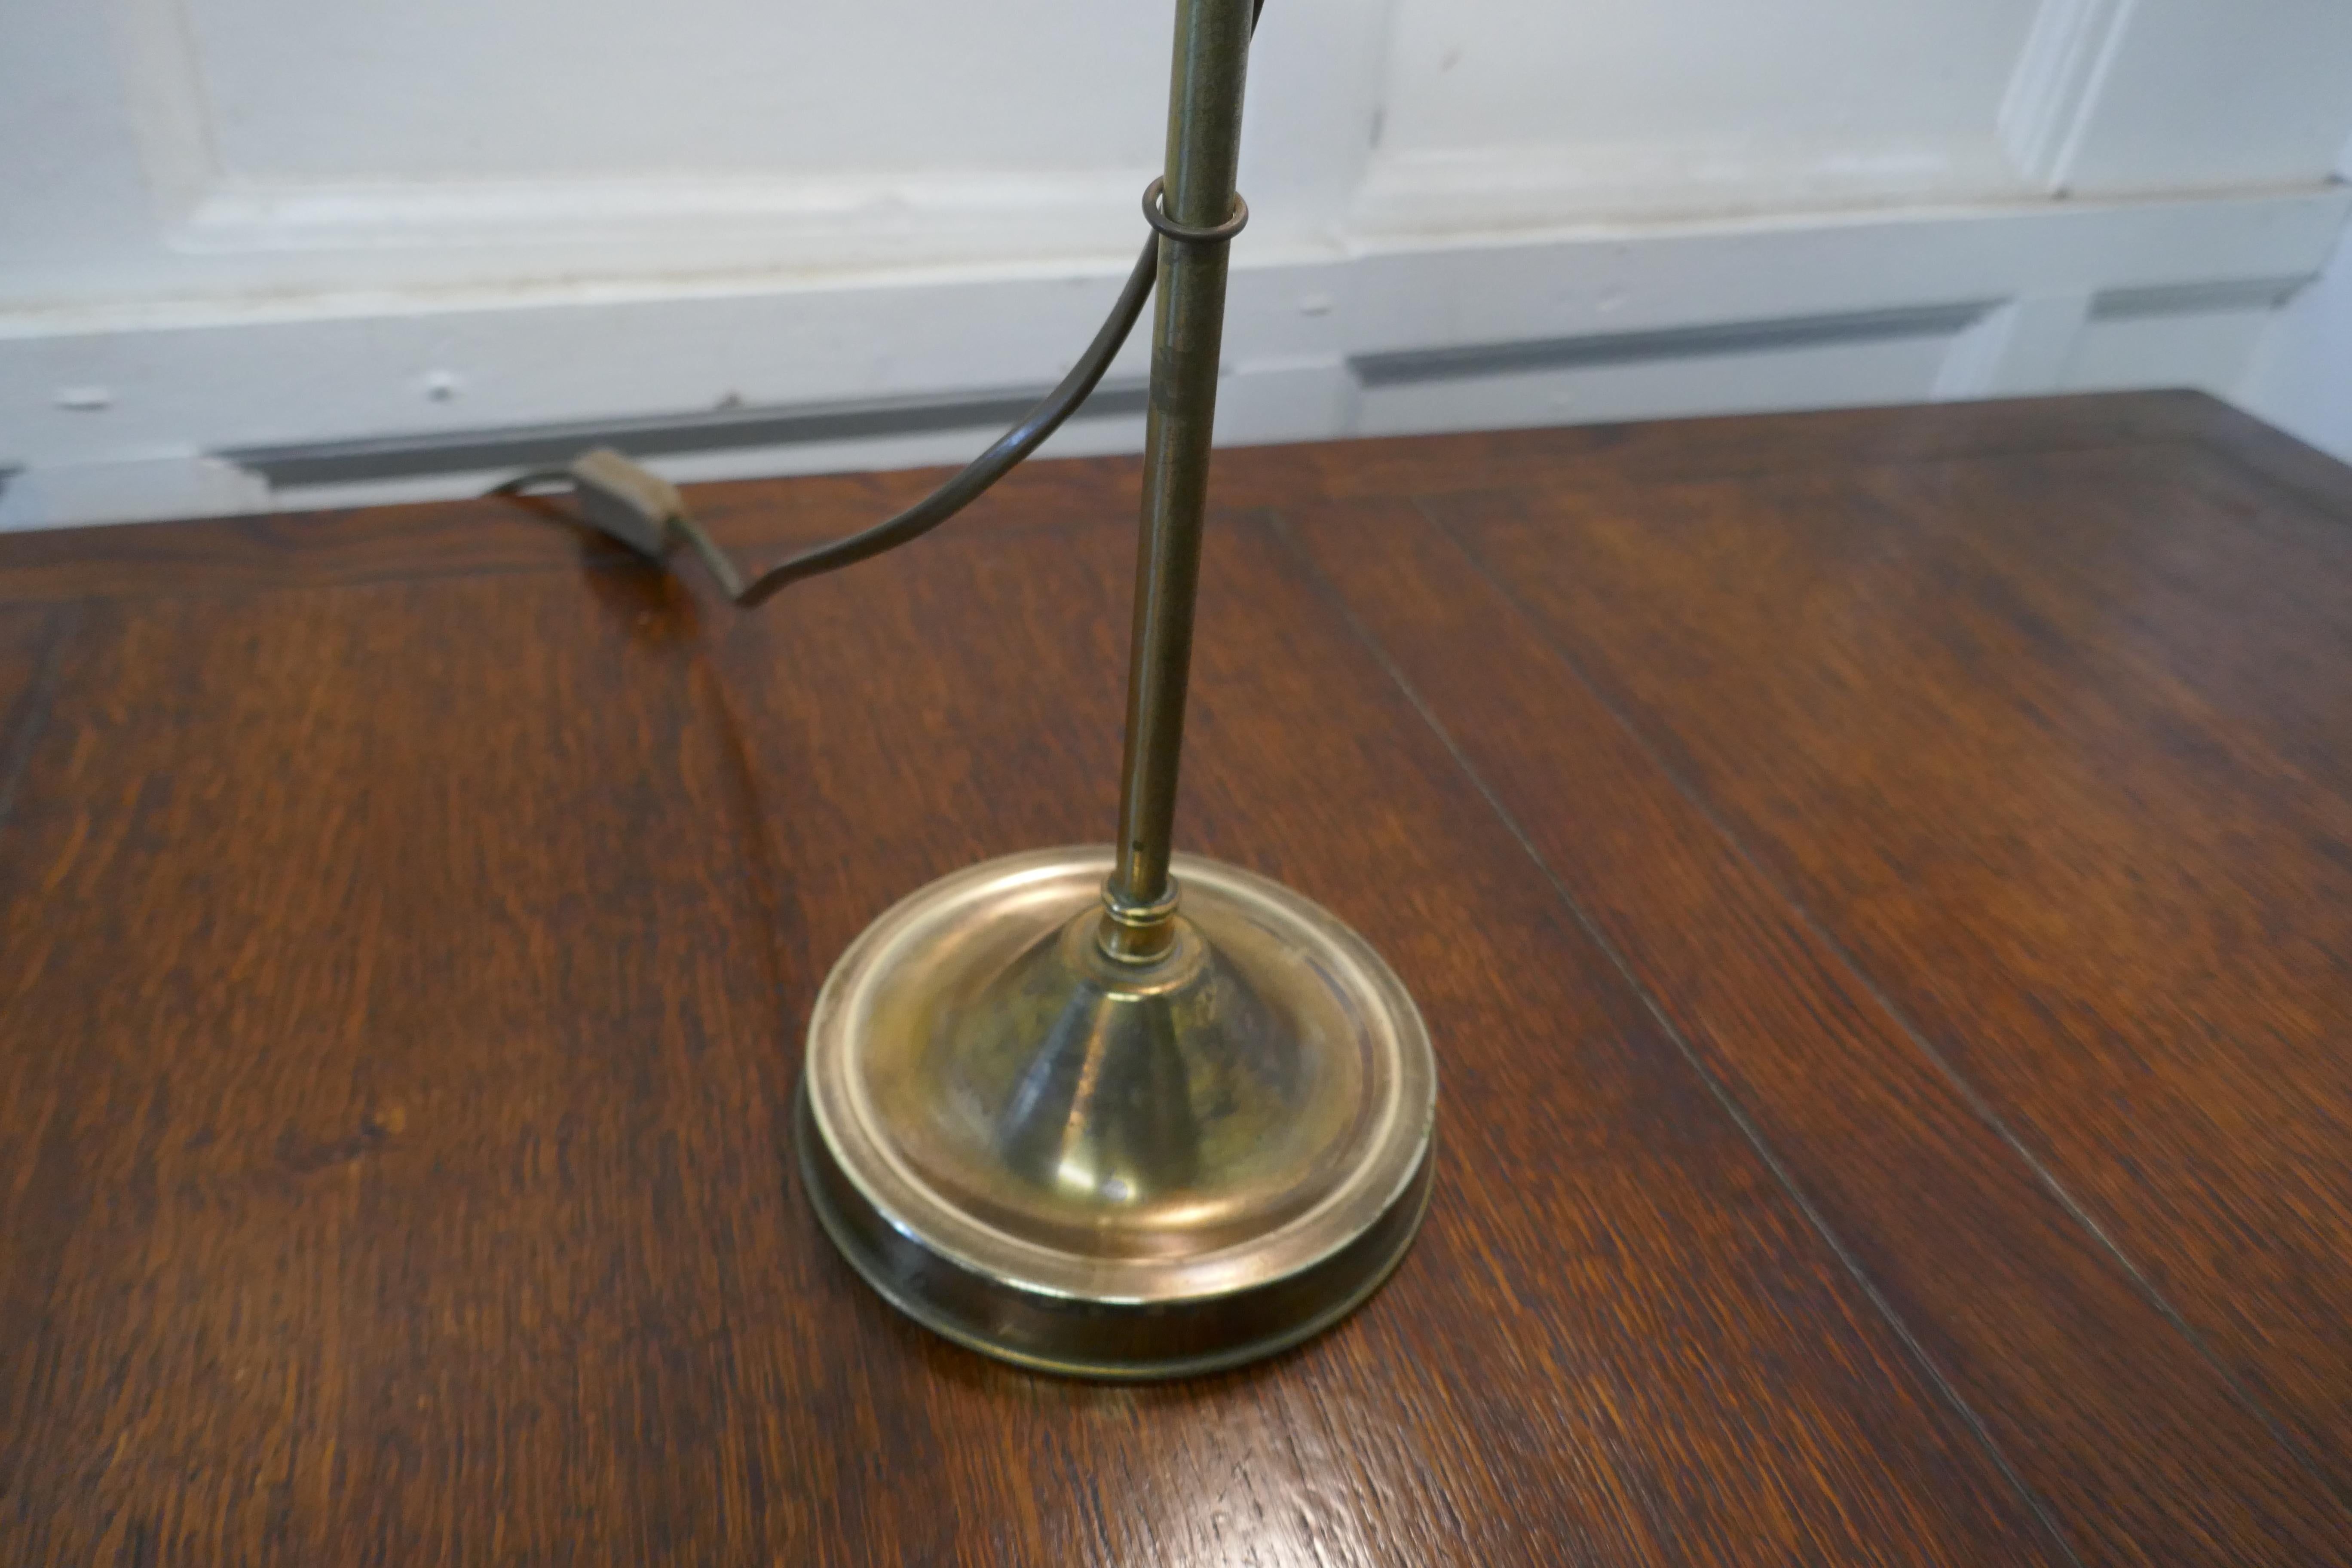 French Provincial French Brass Desk Lamp with Opaline Glass Shade